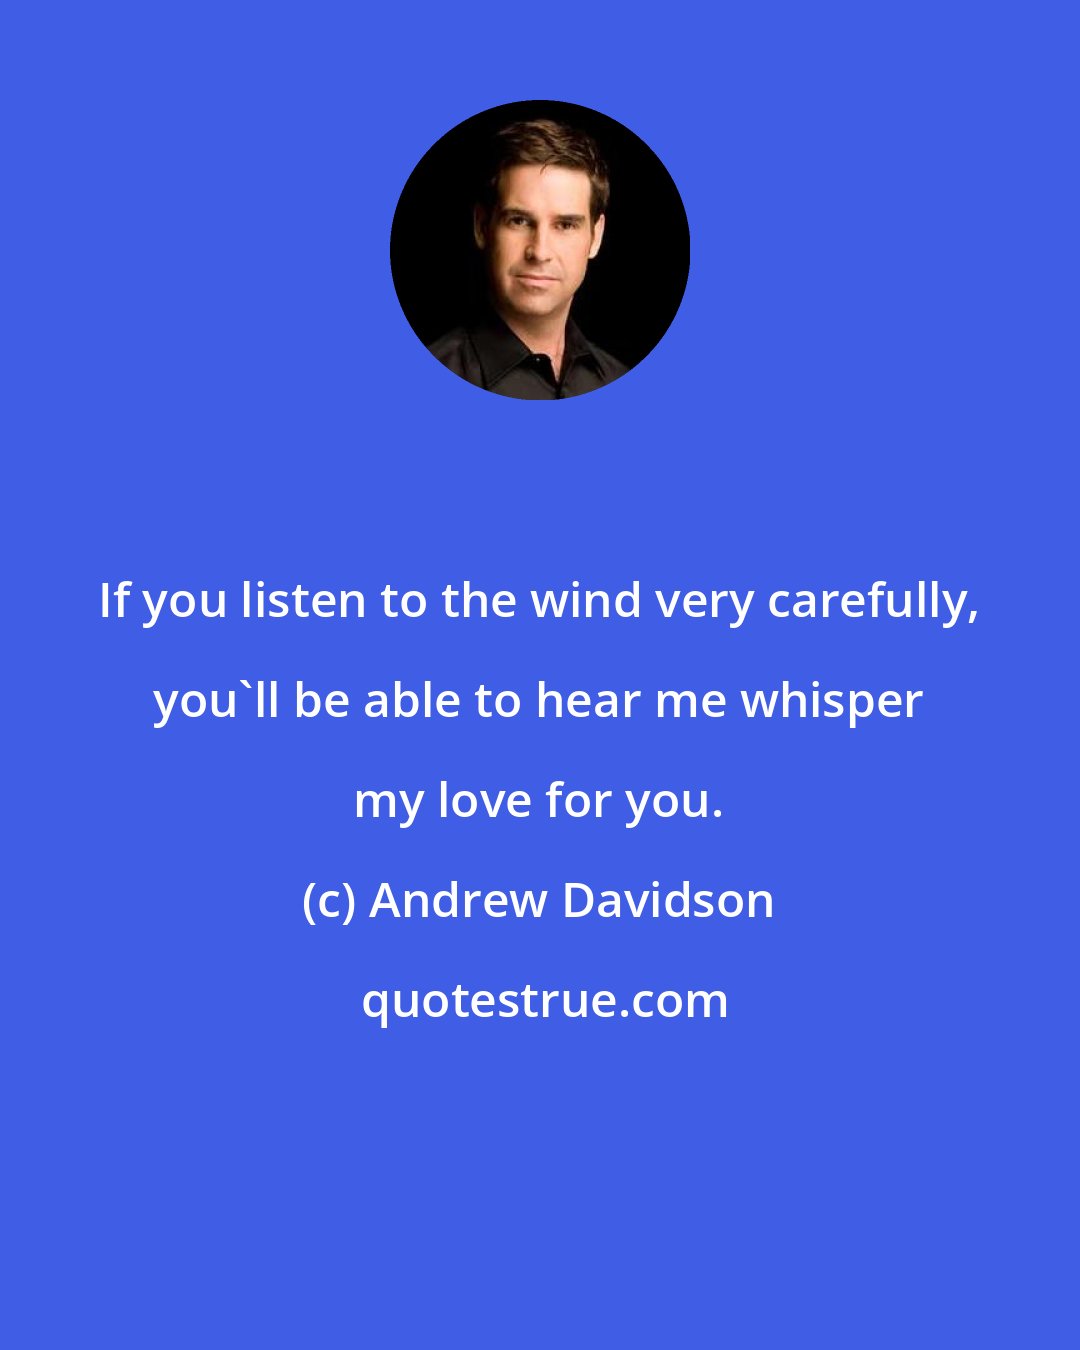 Andrew Davidson: If you listen to the wind very carefully, you'll be able to hear me whisper my love for you.